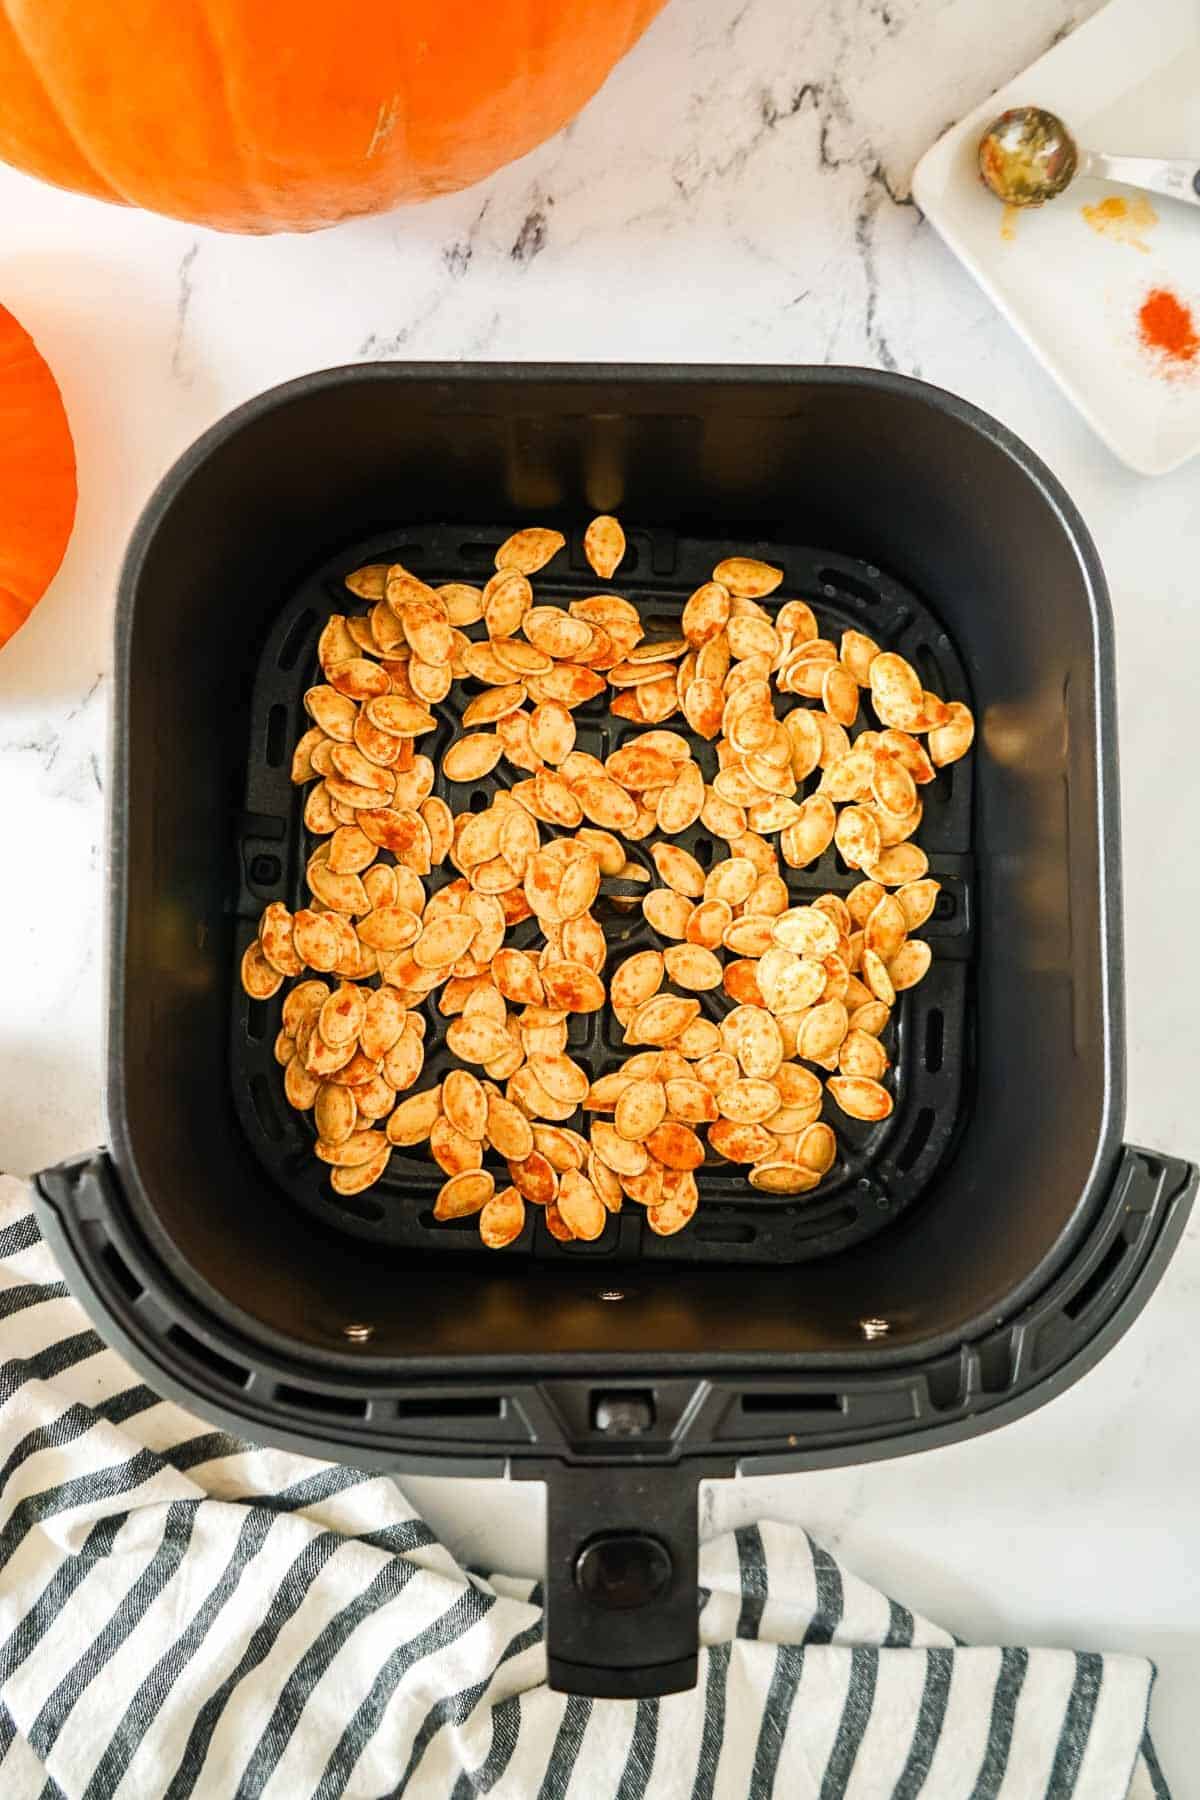 Pumpkin seeds in the air fryer basket before being cooked.